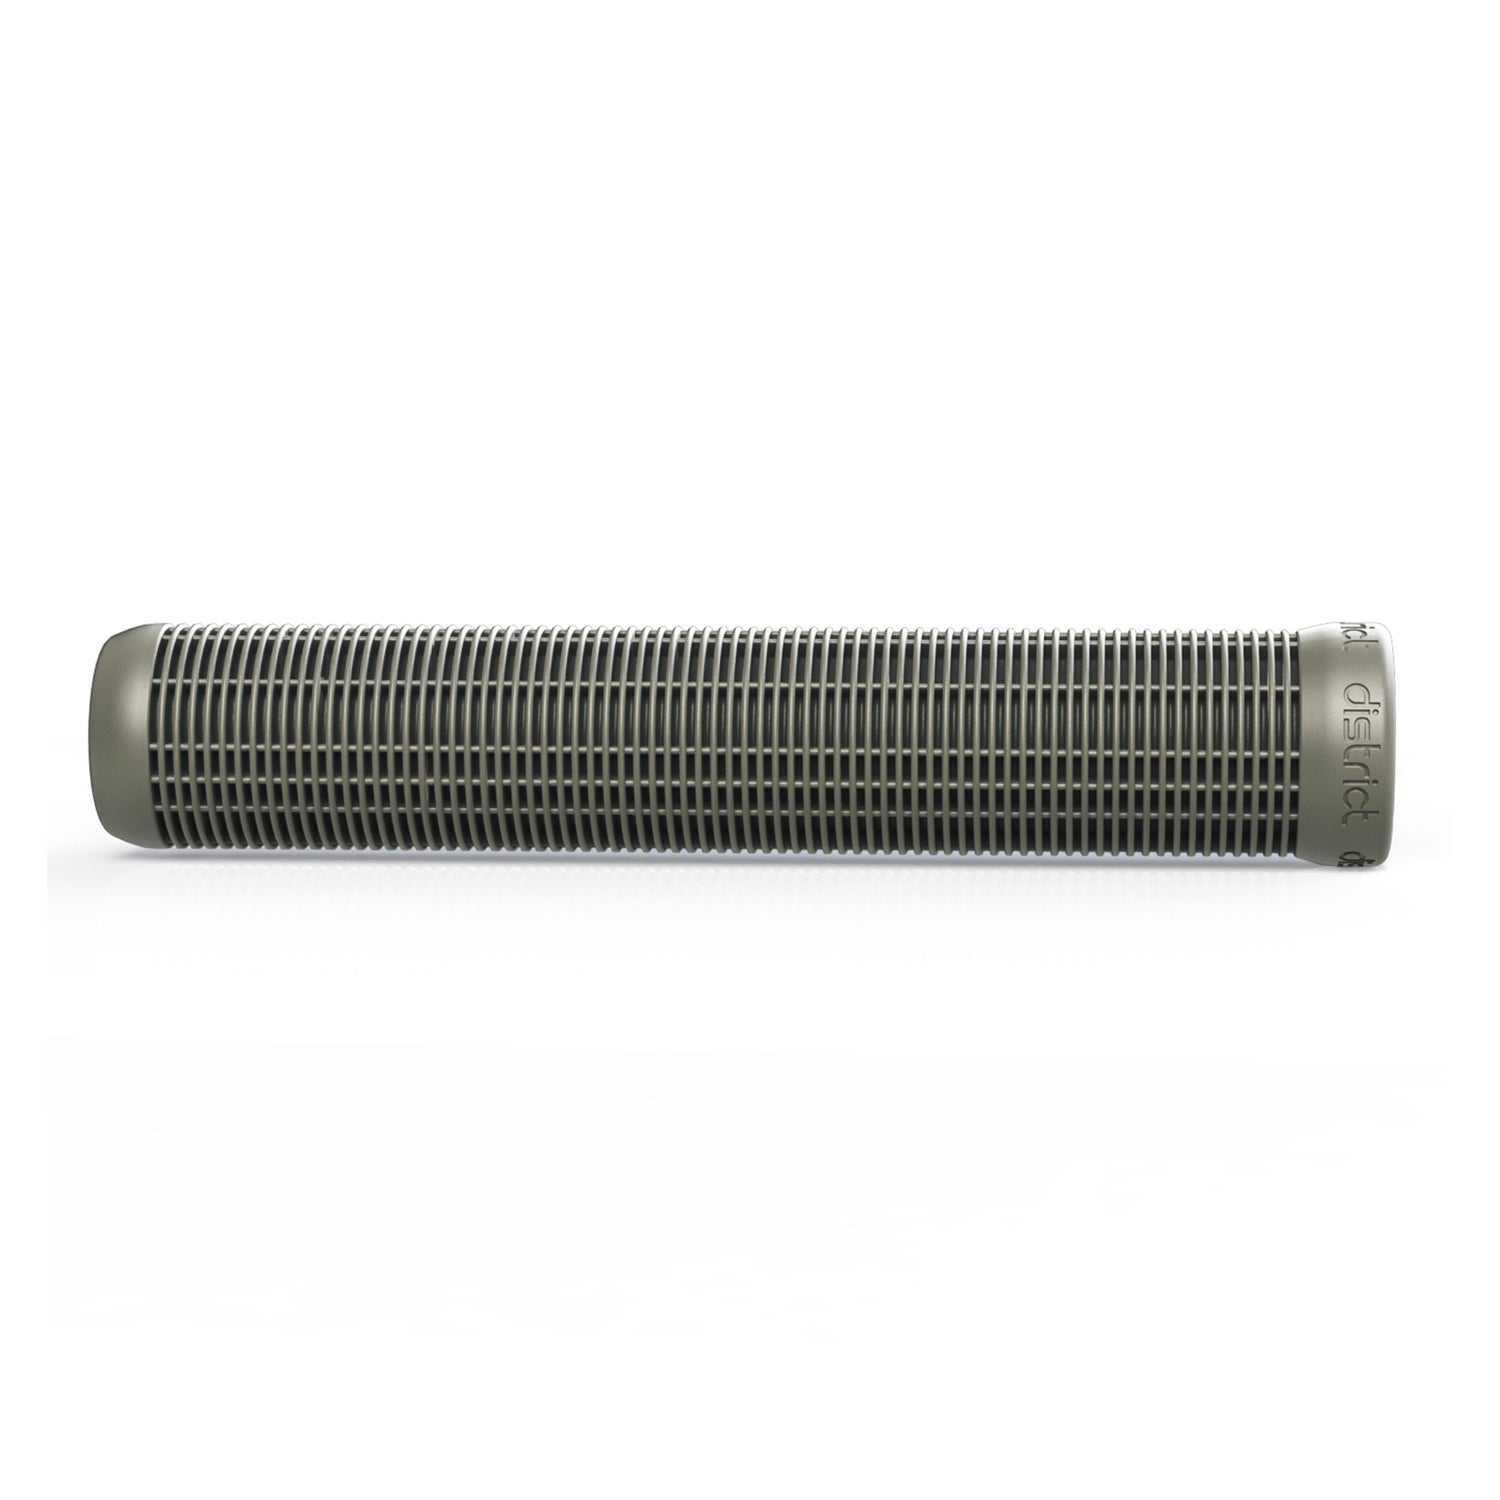 District S-Series G15S Grips Standard 140mm Grey - Prime Delux Store